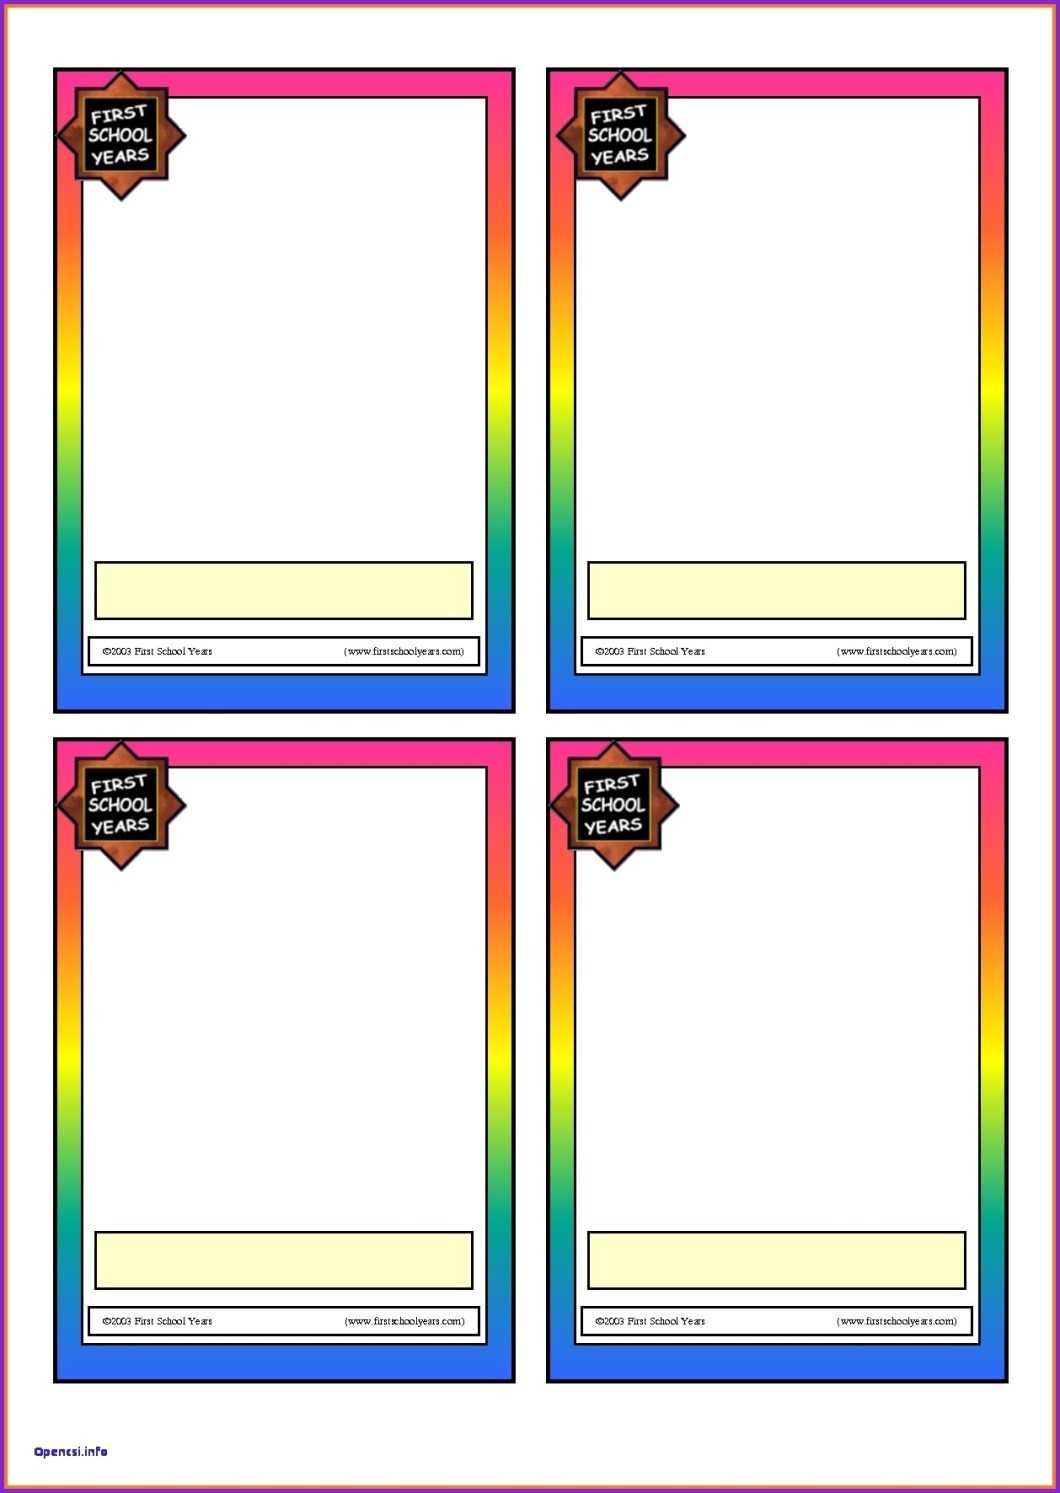 Printable Blank Flash Cards Cardjdi Org Flashcards With Free Printable Flash Cards Template